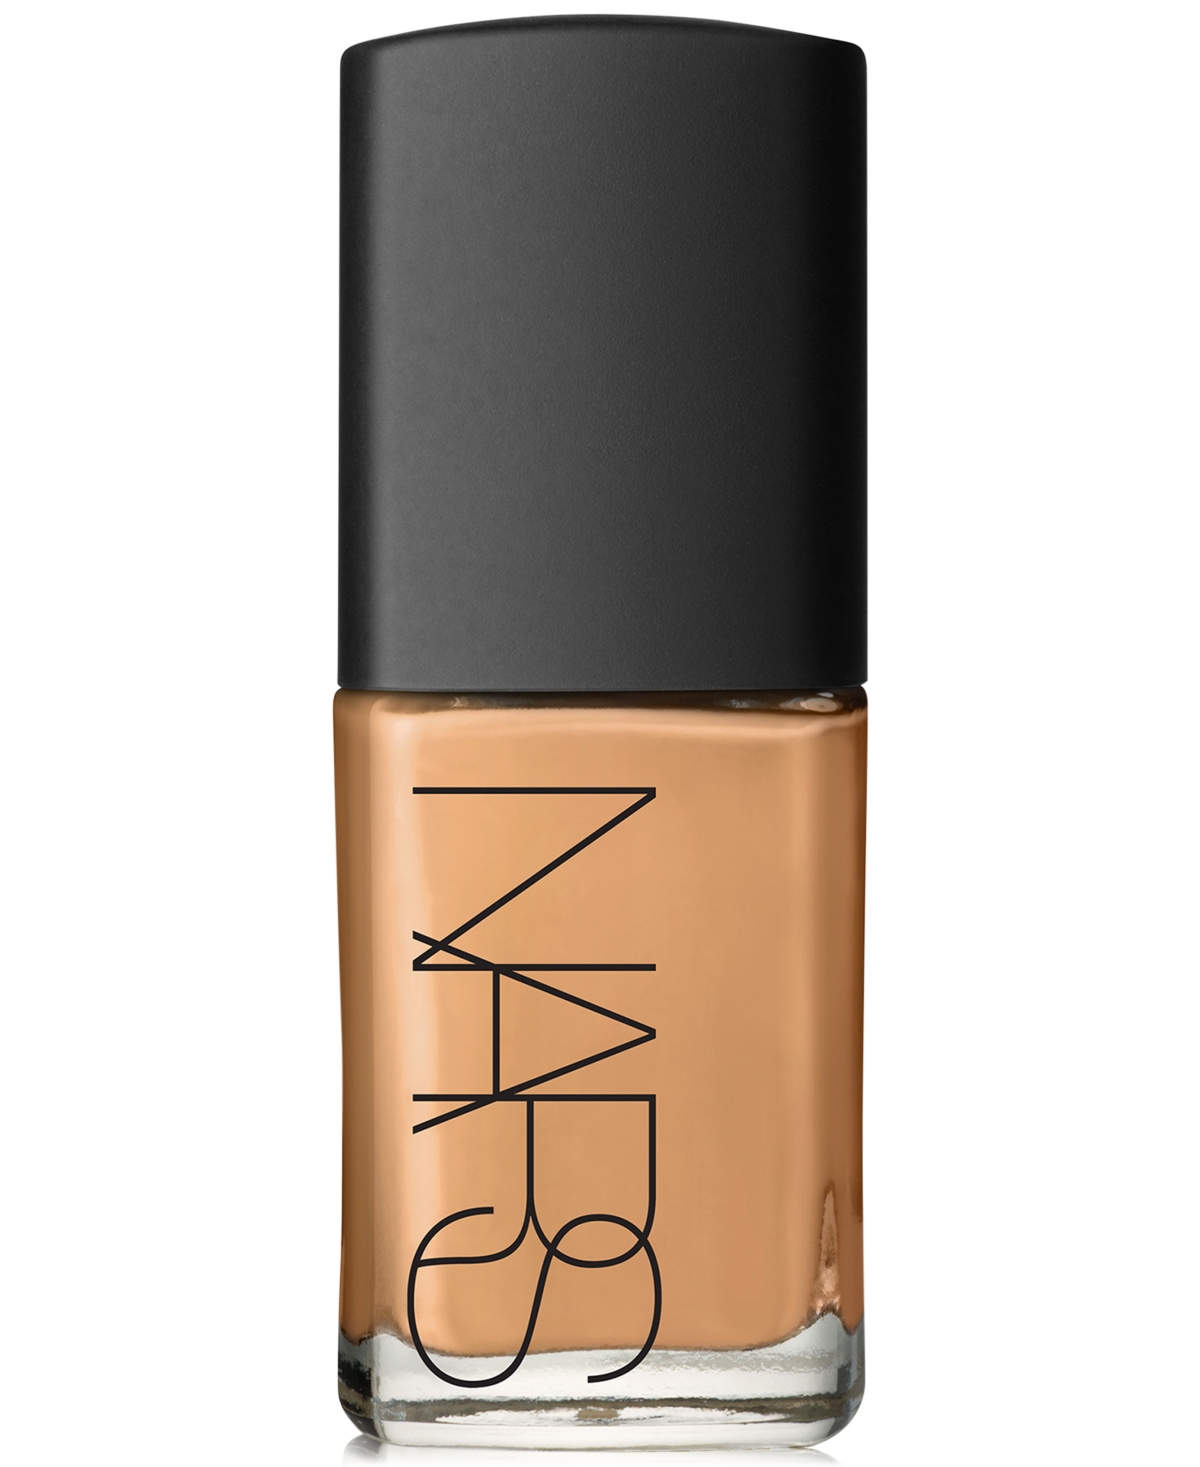 Nars Sheer Glow Foundation, 1 Oz. In Huahine (md. - Medium-deep With Neutral 